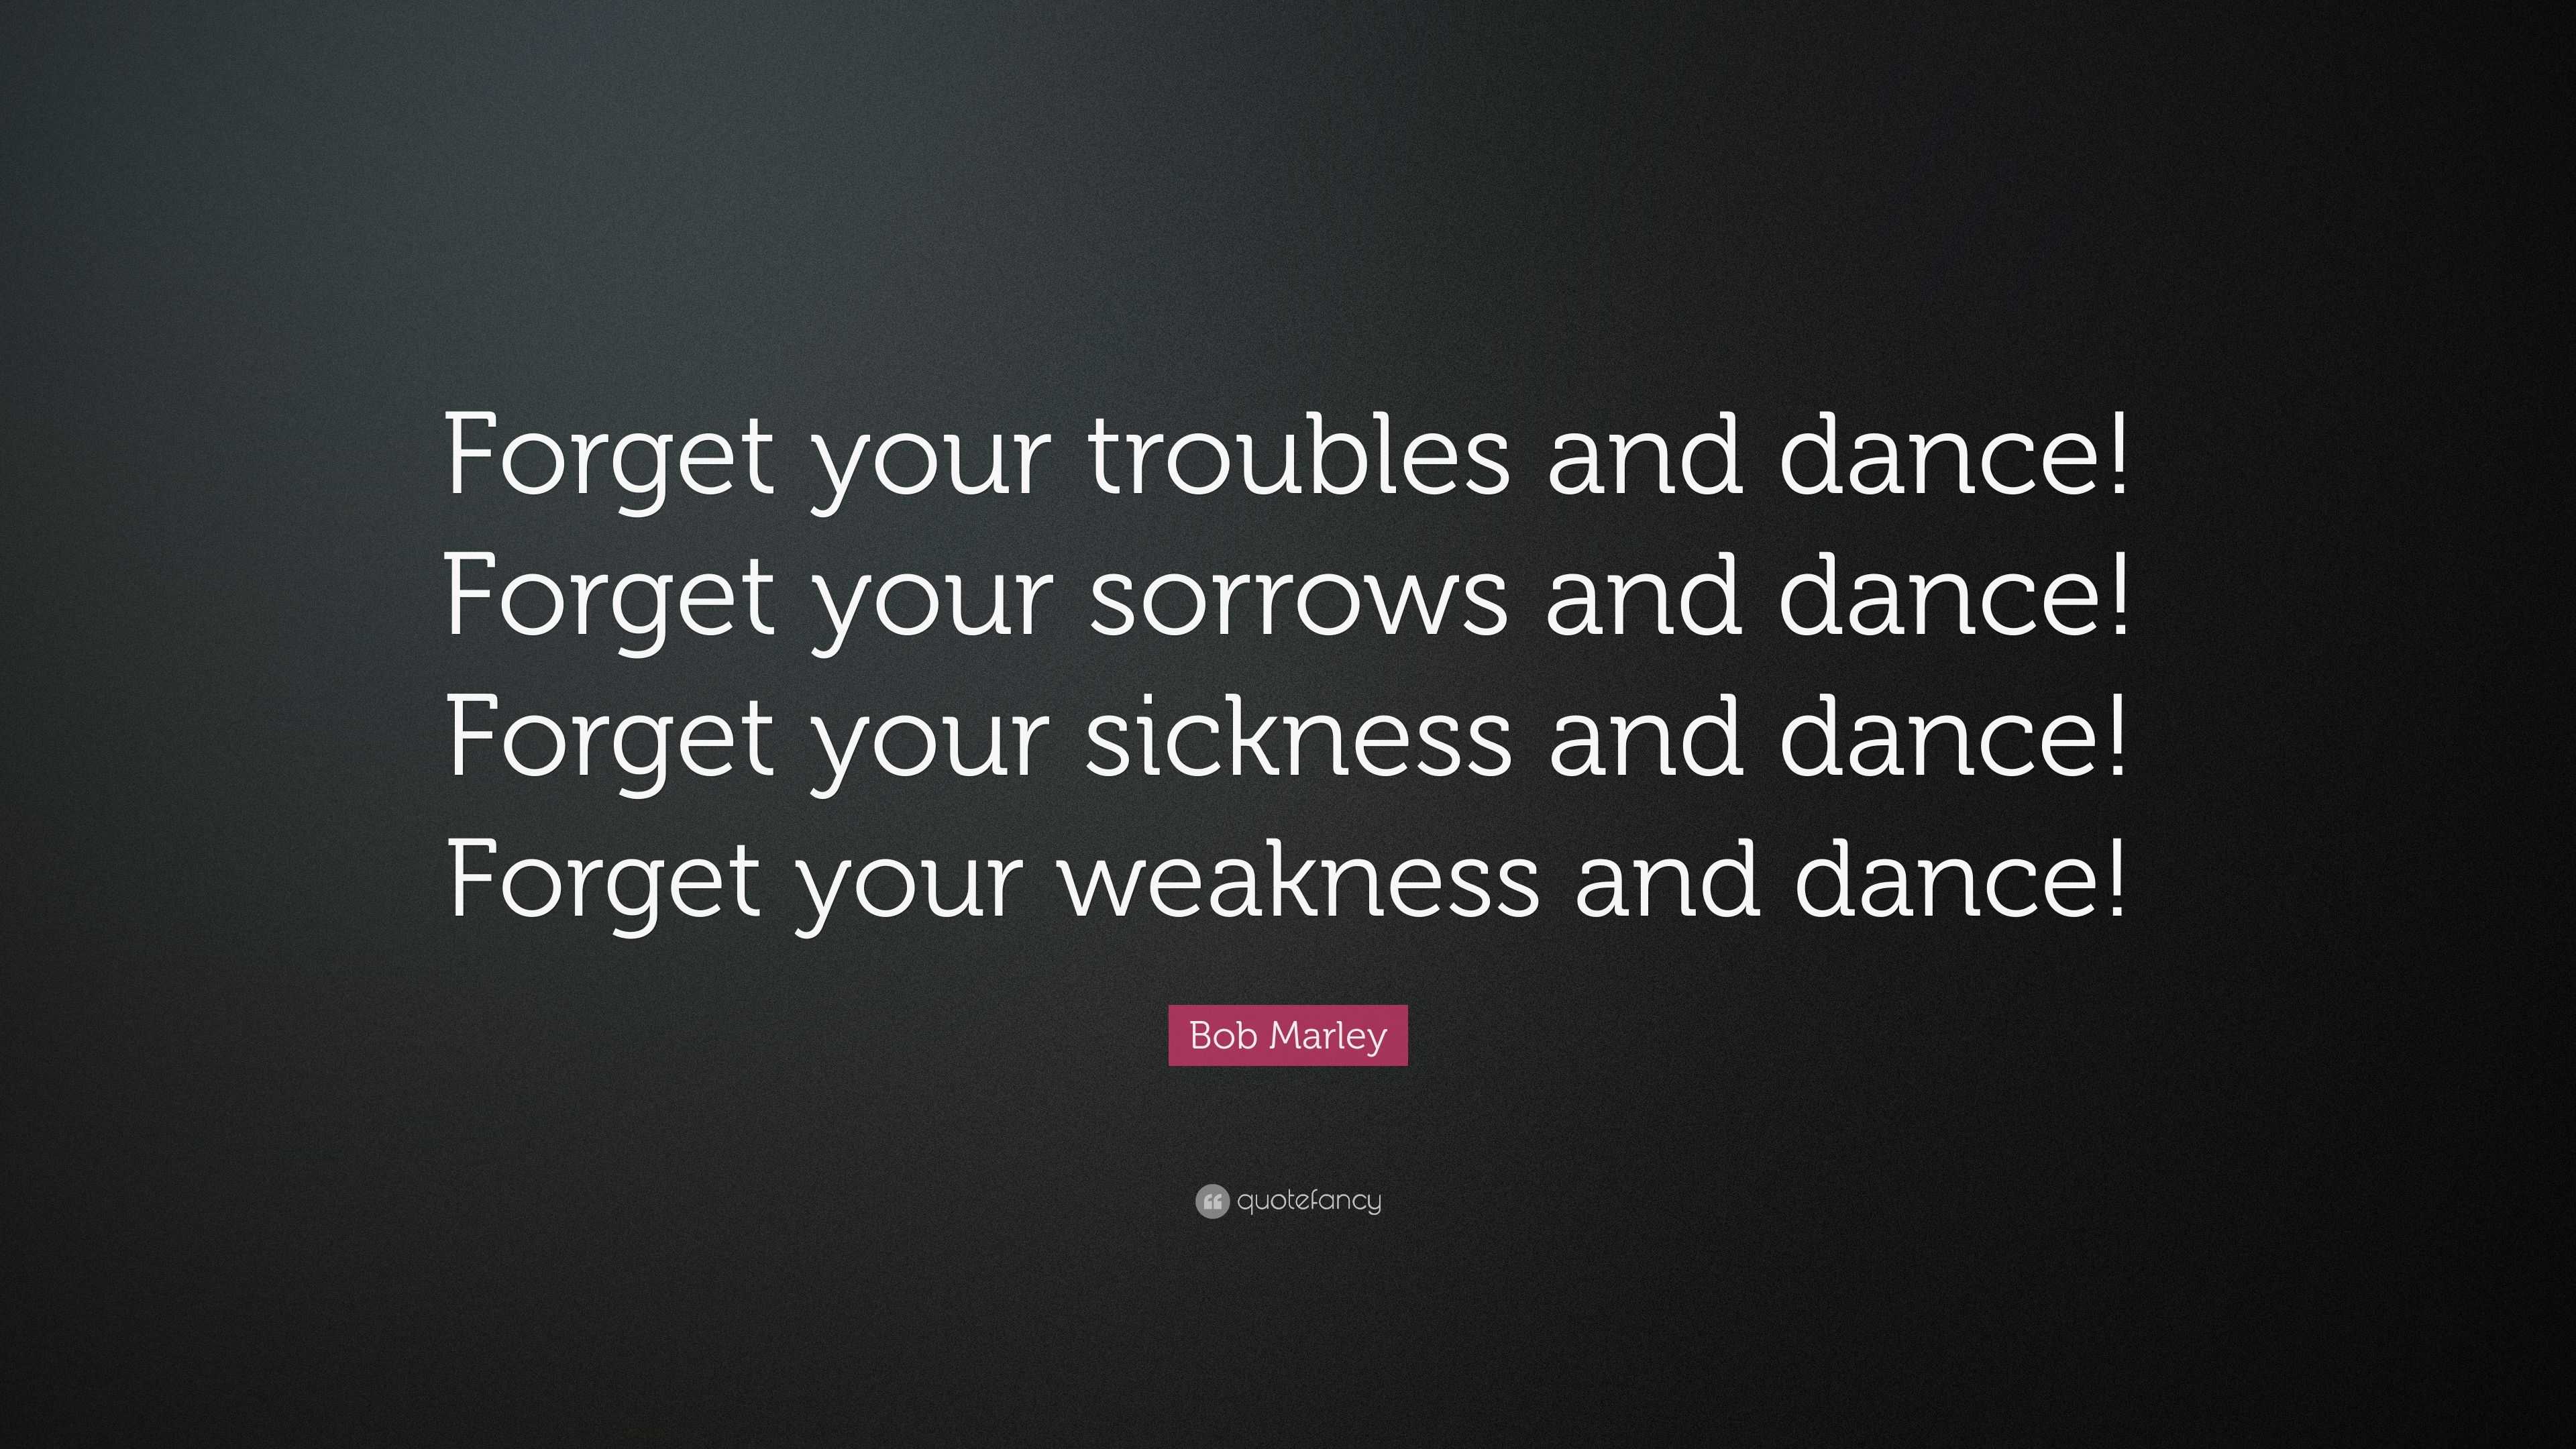 bob marley love quotes only once in your life bob marley quote u201cfor your troubles and dance for your